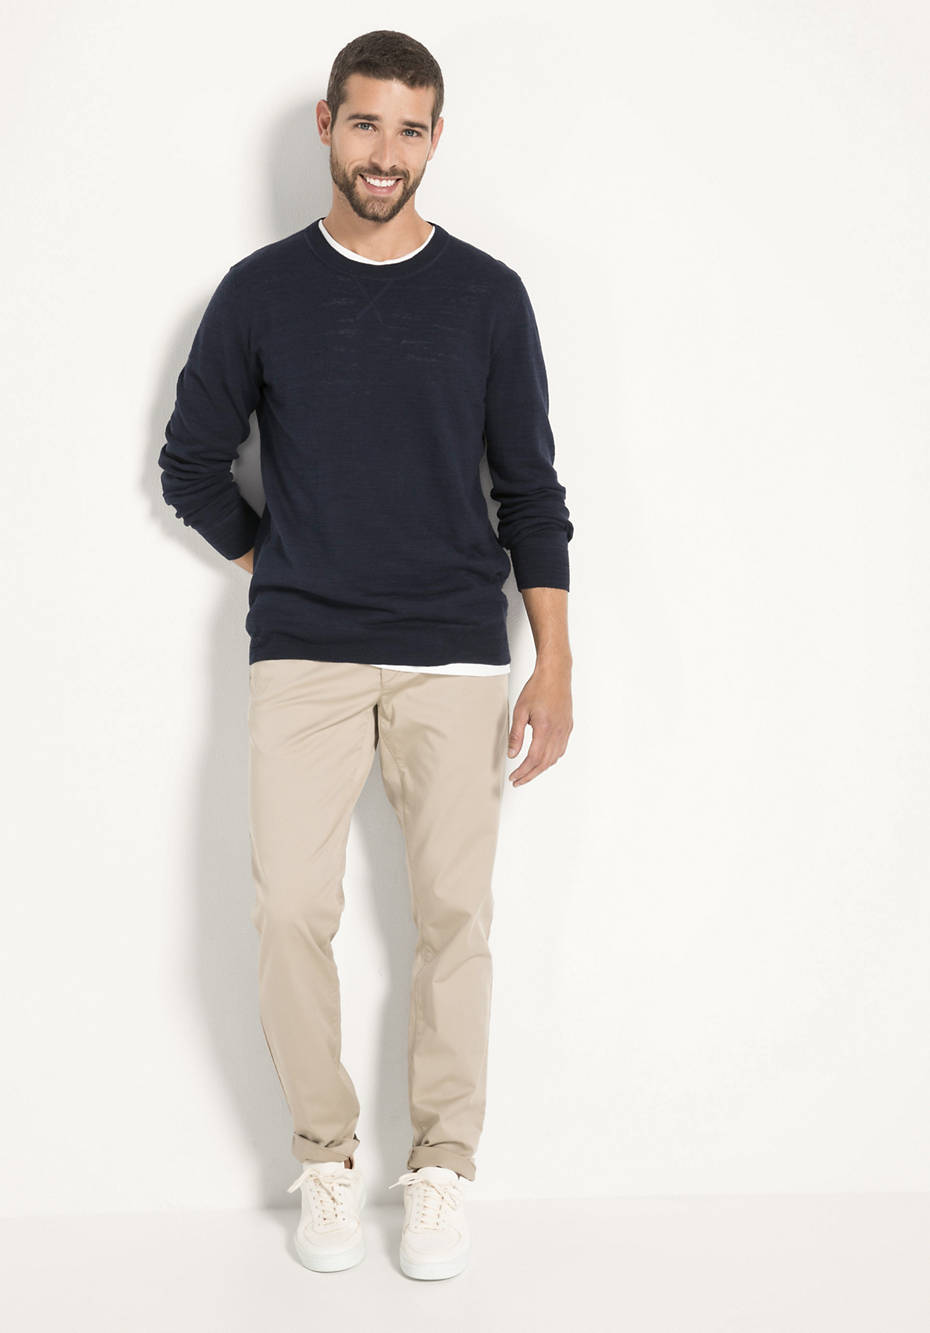 Linen sweater with organic cotton